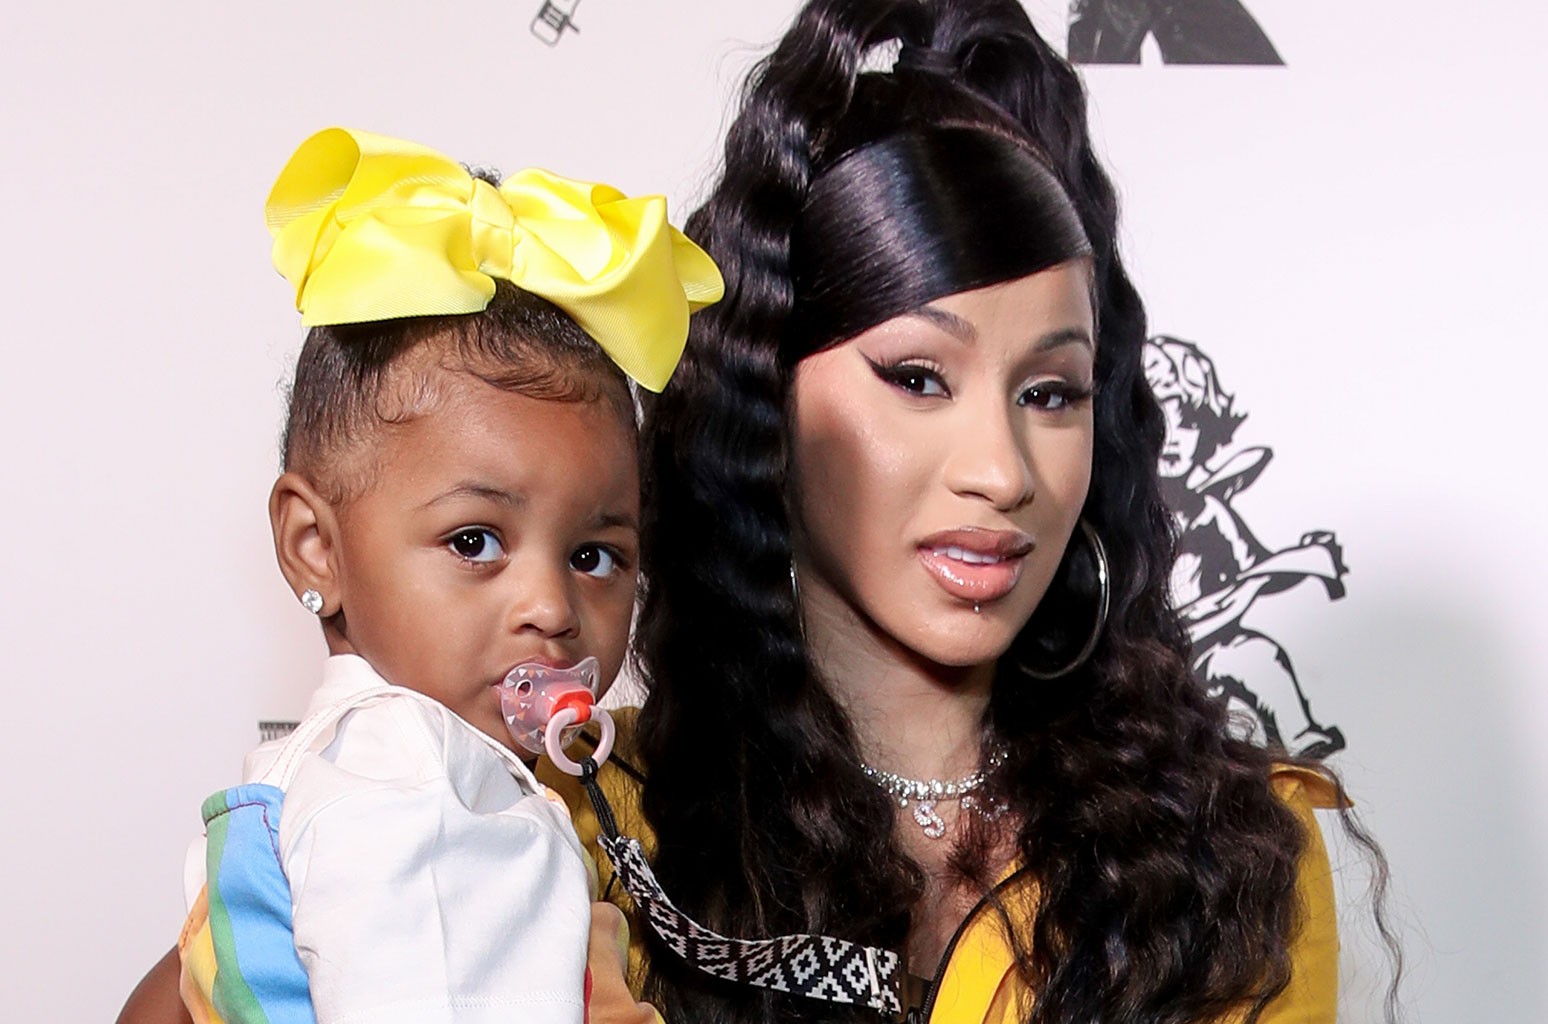 “WAP” Is for the Culture, Not Kulture: Cardi B Explains Why She Turned The Song Off In Front of Her Daughter In Viral Video